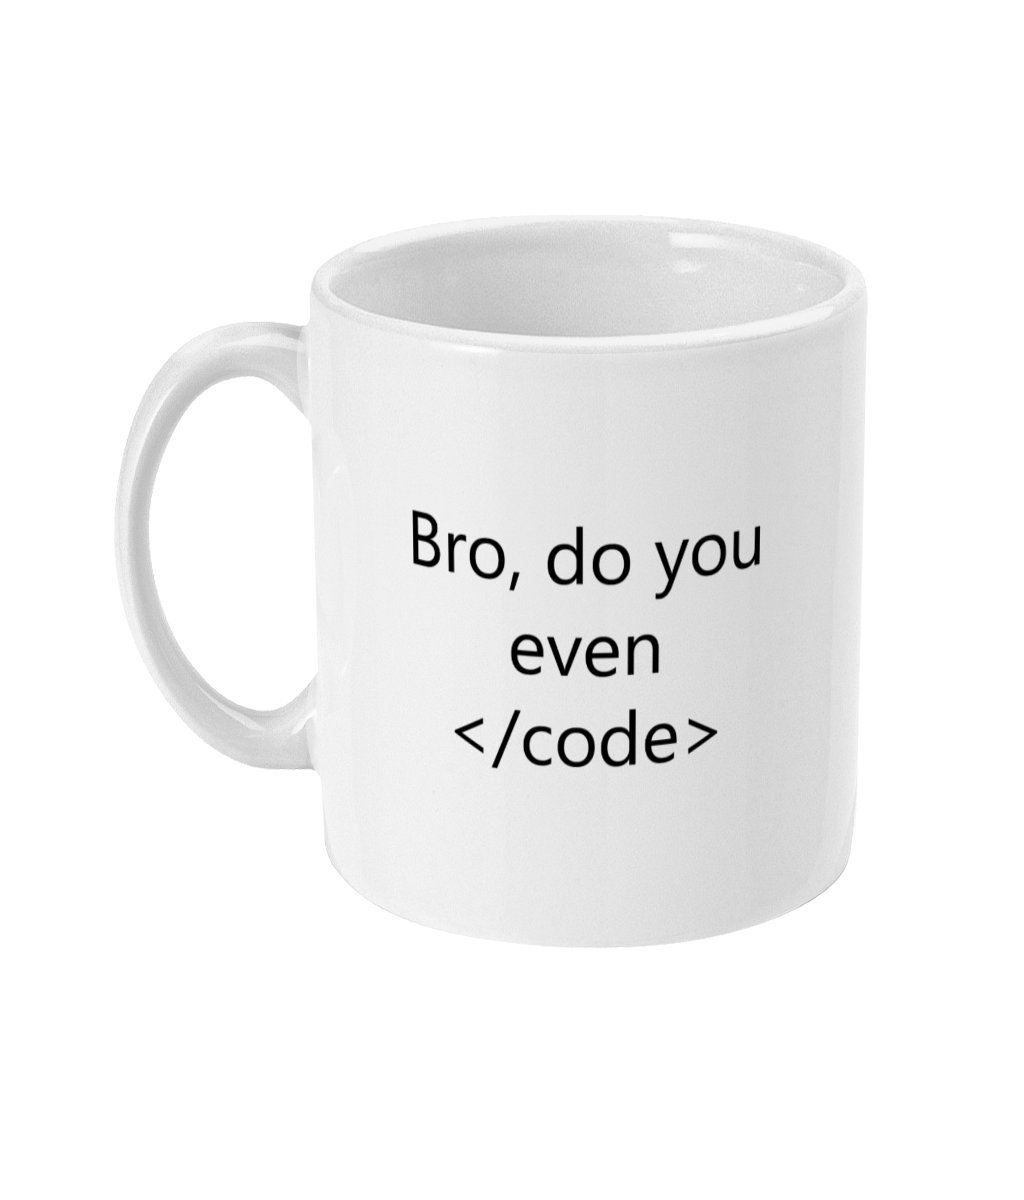 Coder Mug - Bro, Do You Even Code, Computer Programmer Coffee Mug, Programming, Coding, Nerd, Geek - View & Purchase at our Etsy store: etsy.me/2Am2DVf #funnycoffeemug #brodoyouevencode #codergift #coder #computerprogrammer #programming #coding #programmer